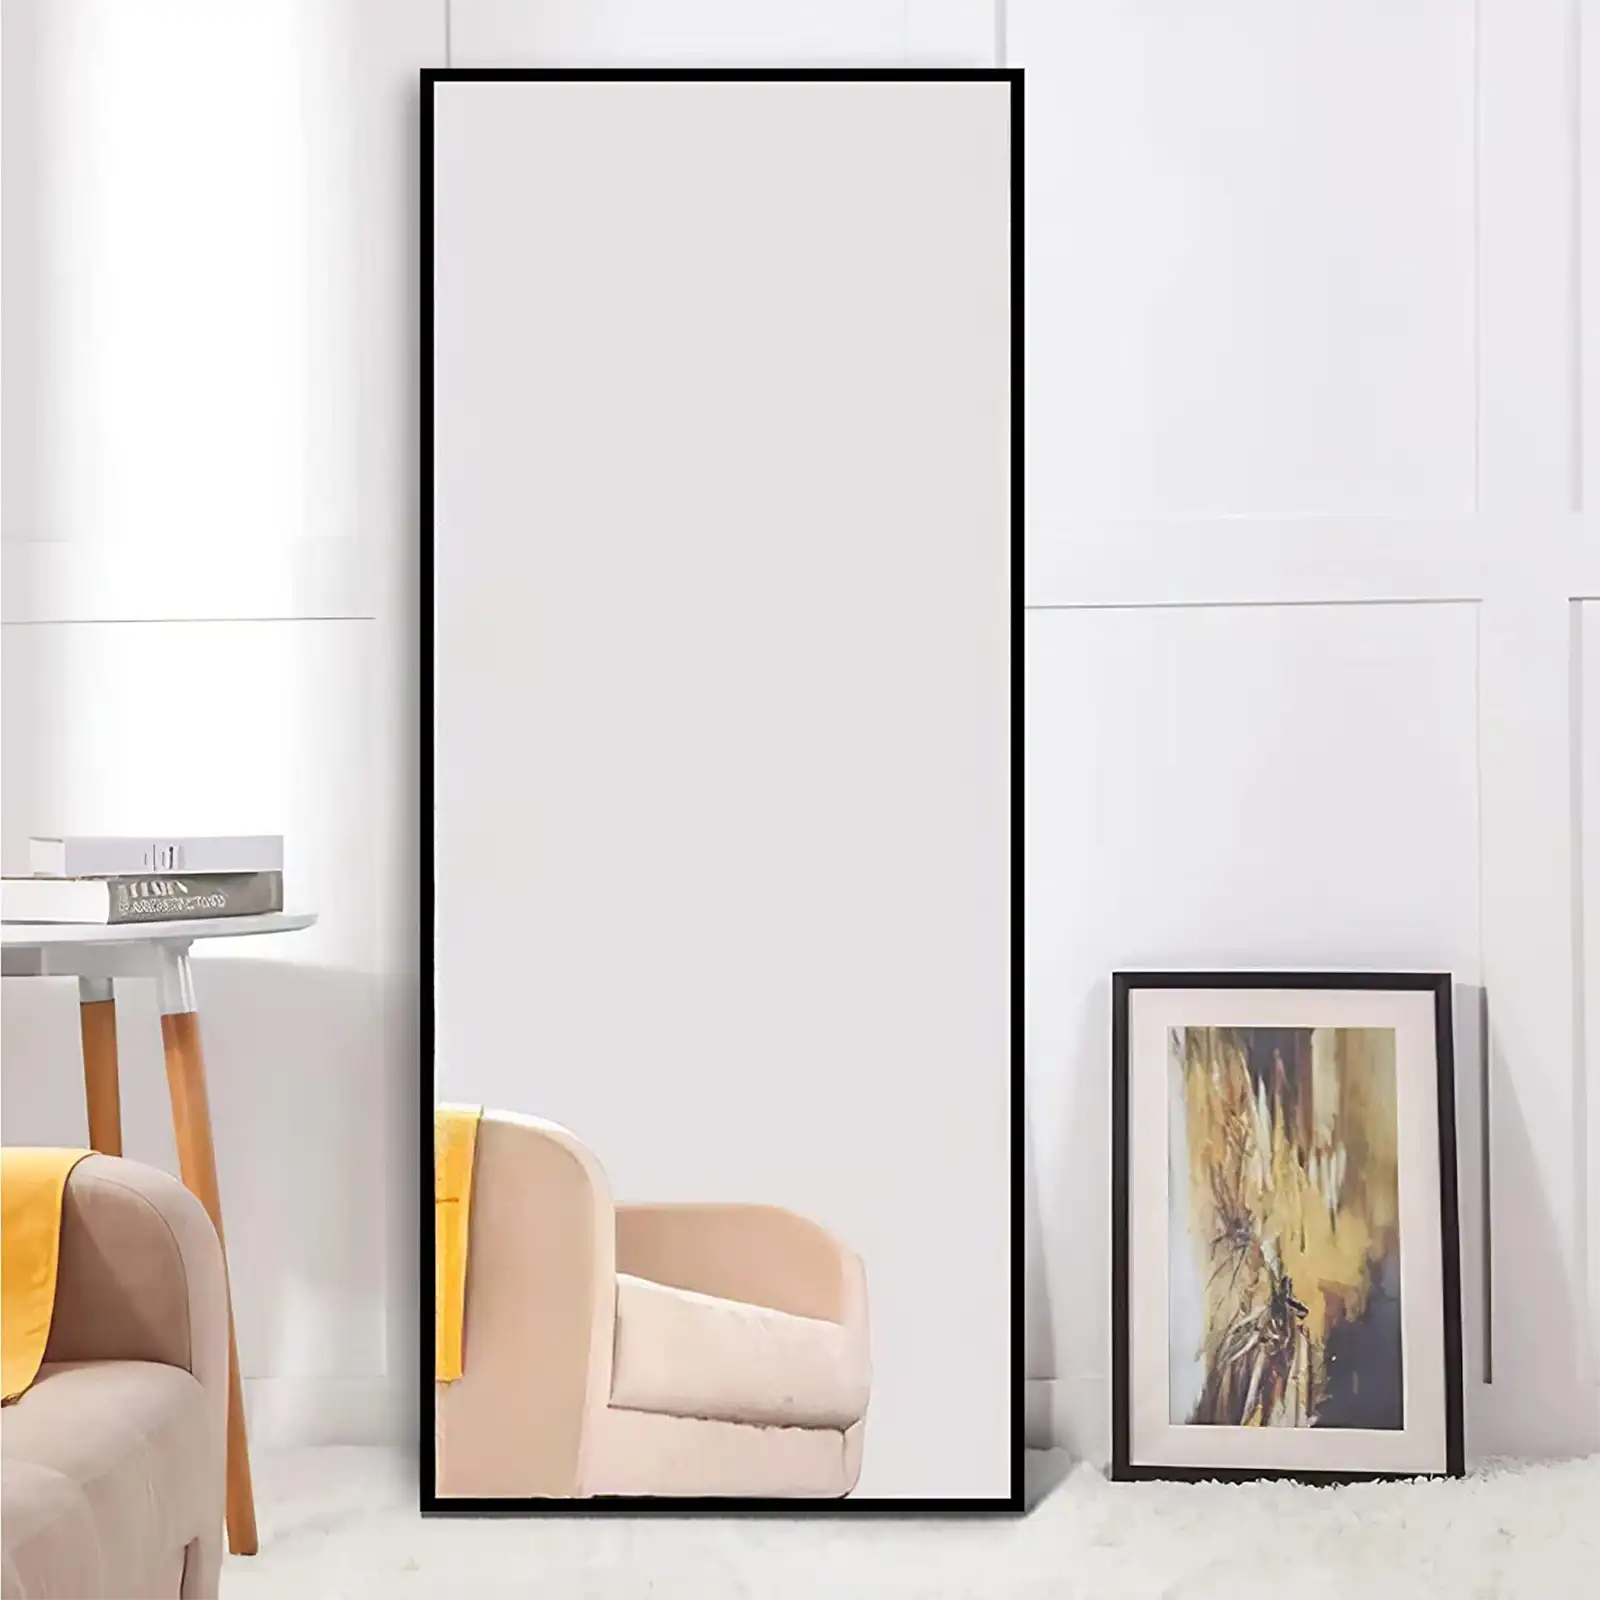 Full Length Mirror Dressing Mirror with Standing Holder 59"x20" or 55"x16" Large Rectangle Bedroom Floor Mirror Wall-Mounted Mirror Hanging Leaning